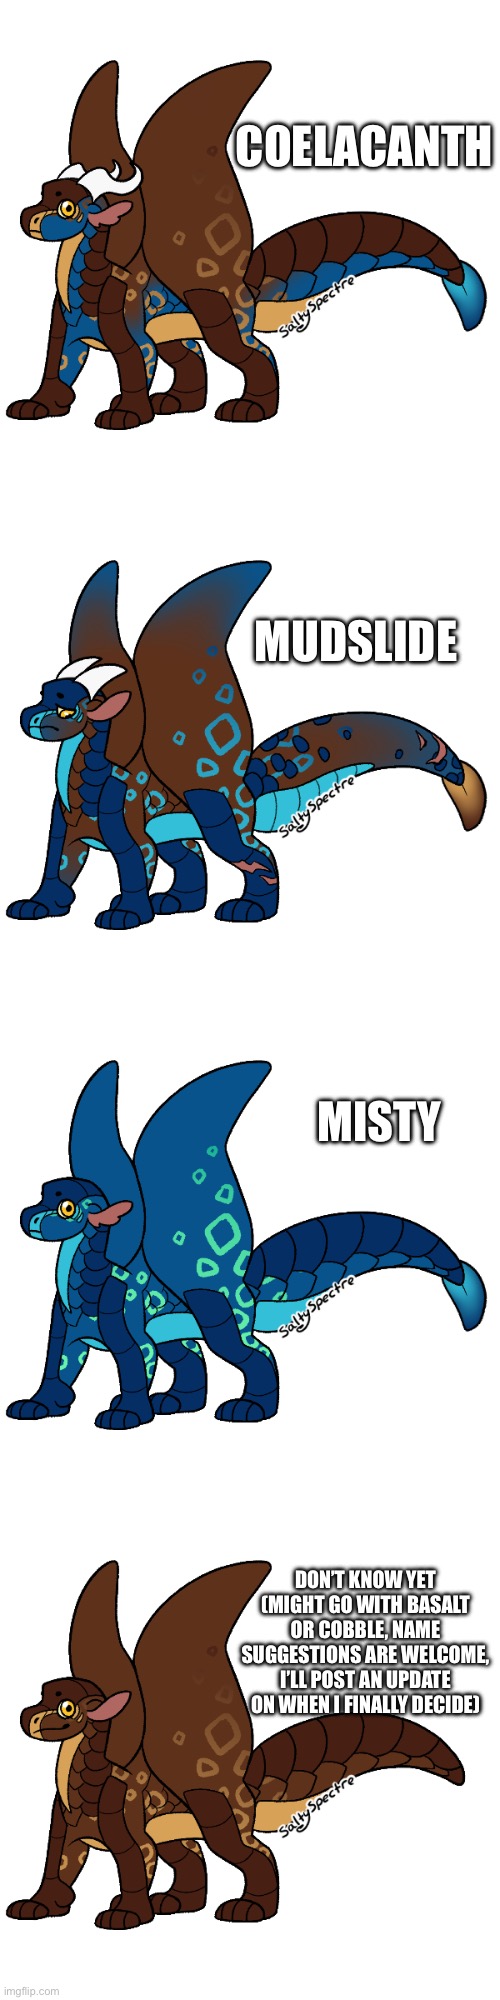 Yes, they’re all siblings with 1 missing. | COELACANTH; MUDSLIDE; MISTY; DON’T KNOW YET (MIGHT GO WITH BASALT OR COBBLE, NAME SUGGESTIONS ARE WELCOME, I’LL POST AN UPDATE ON WHEN I FINALLY DECIDE) | made w/ Imgflip meme maker